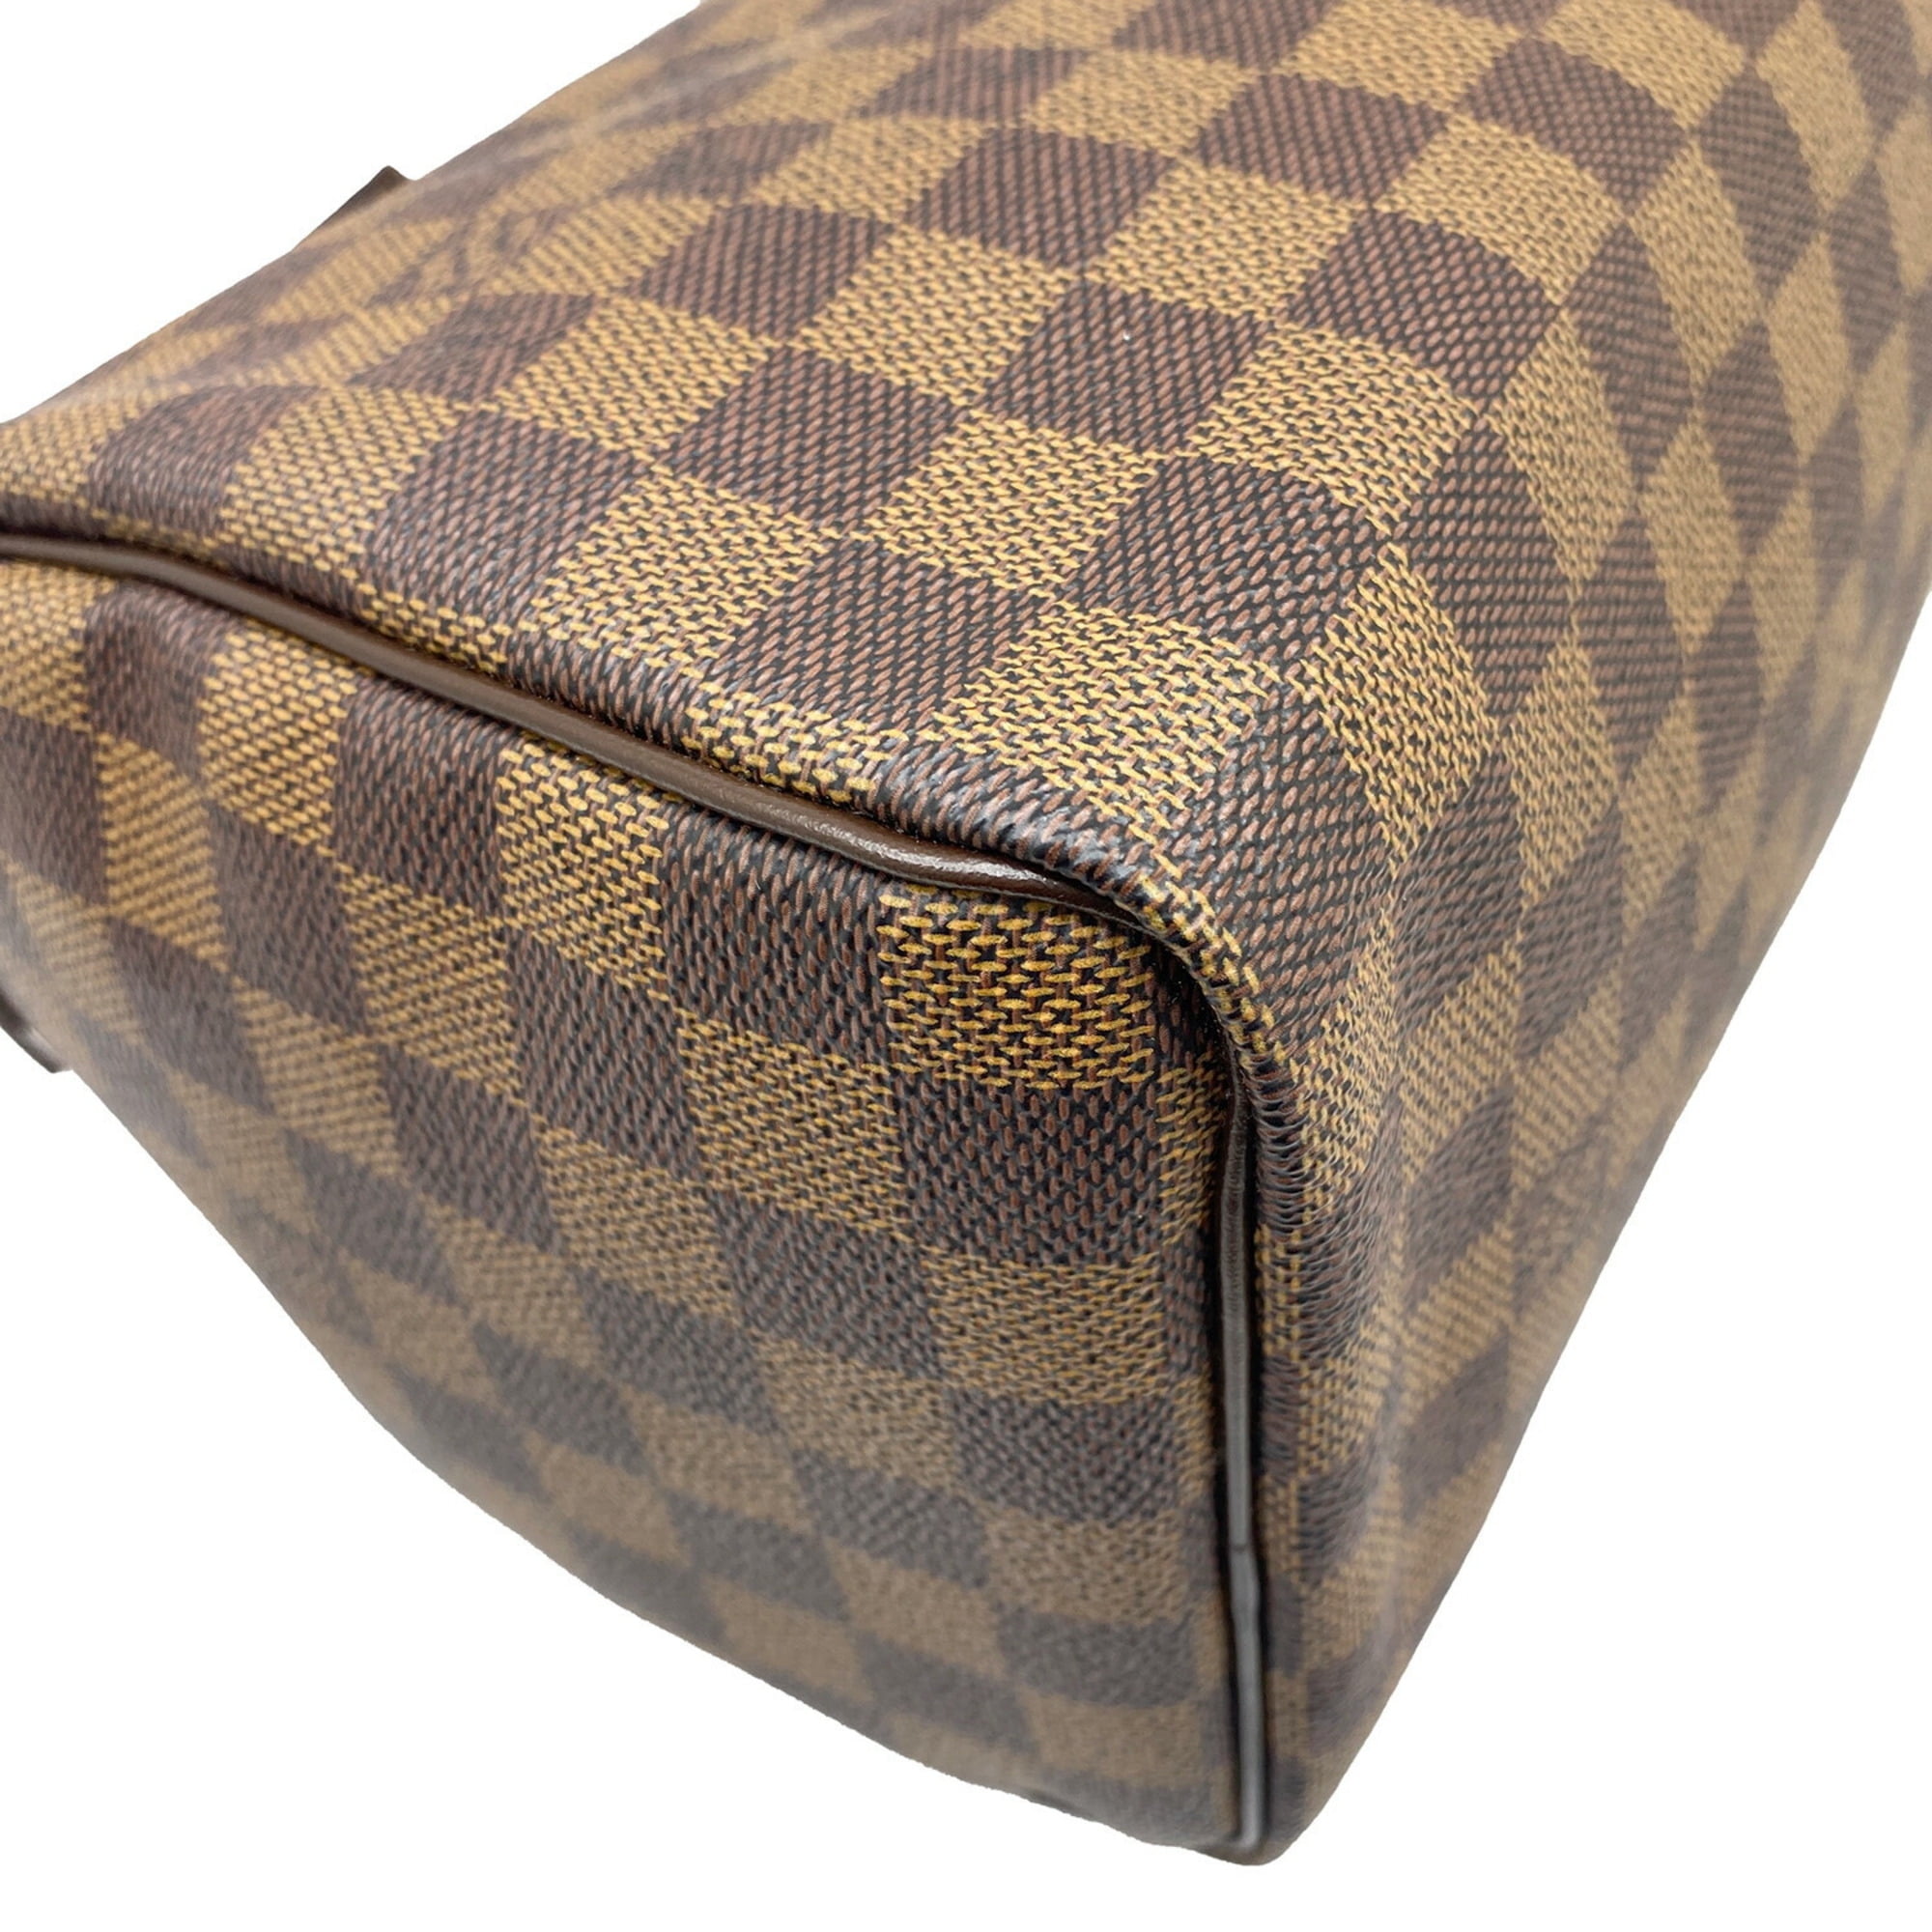 used Unisex Pre-owned Authenticated Louis Vuitton Monogram Speedy 25 Canvas Brown Boston Bag Top HandleBag, Adult Unisex, Size: Small